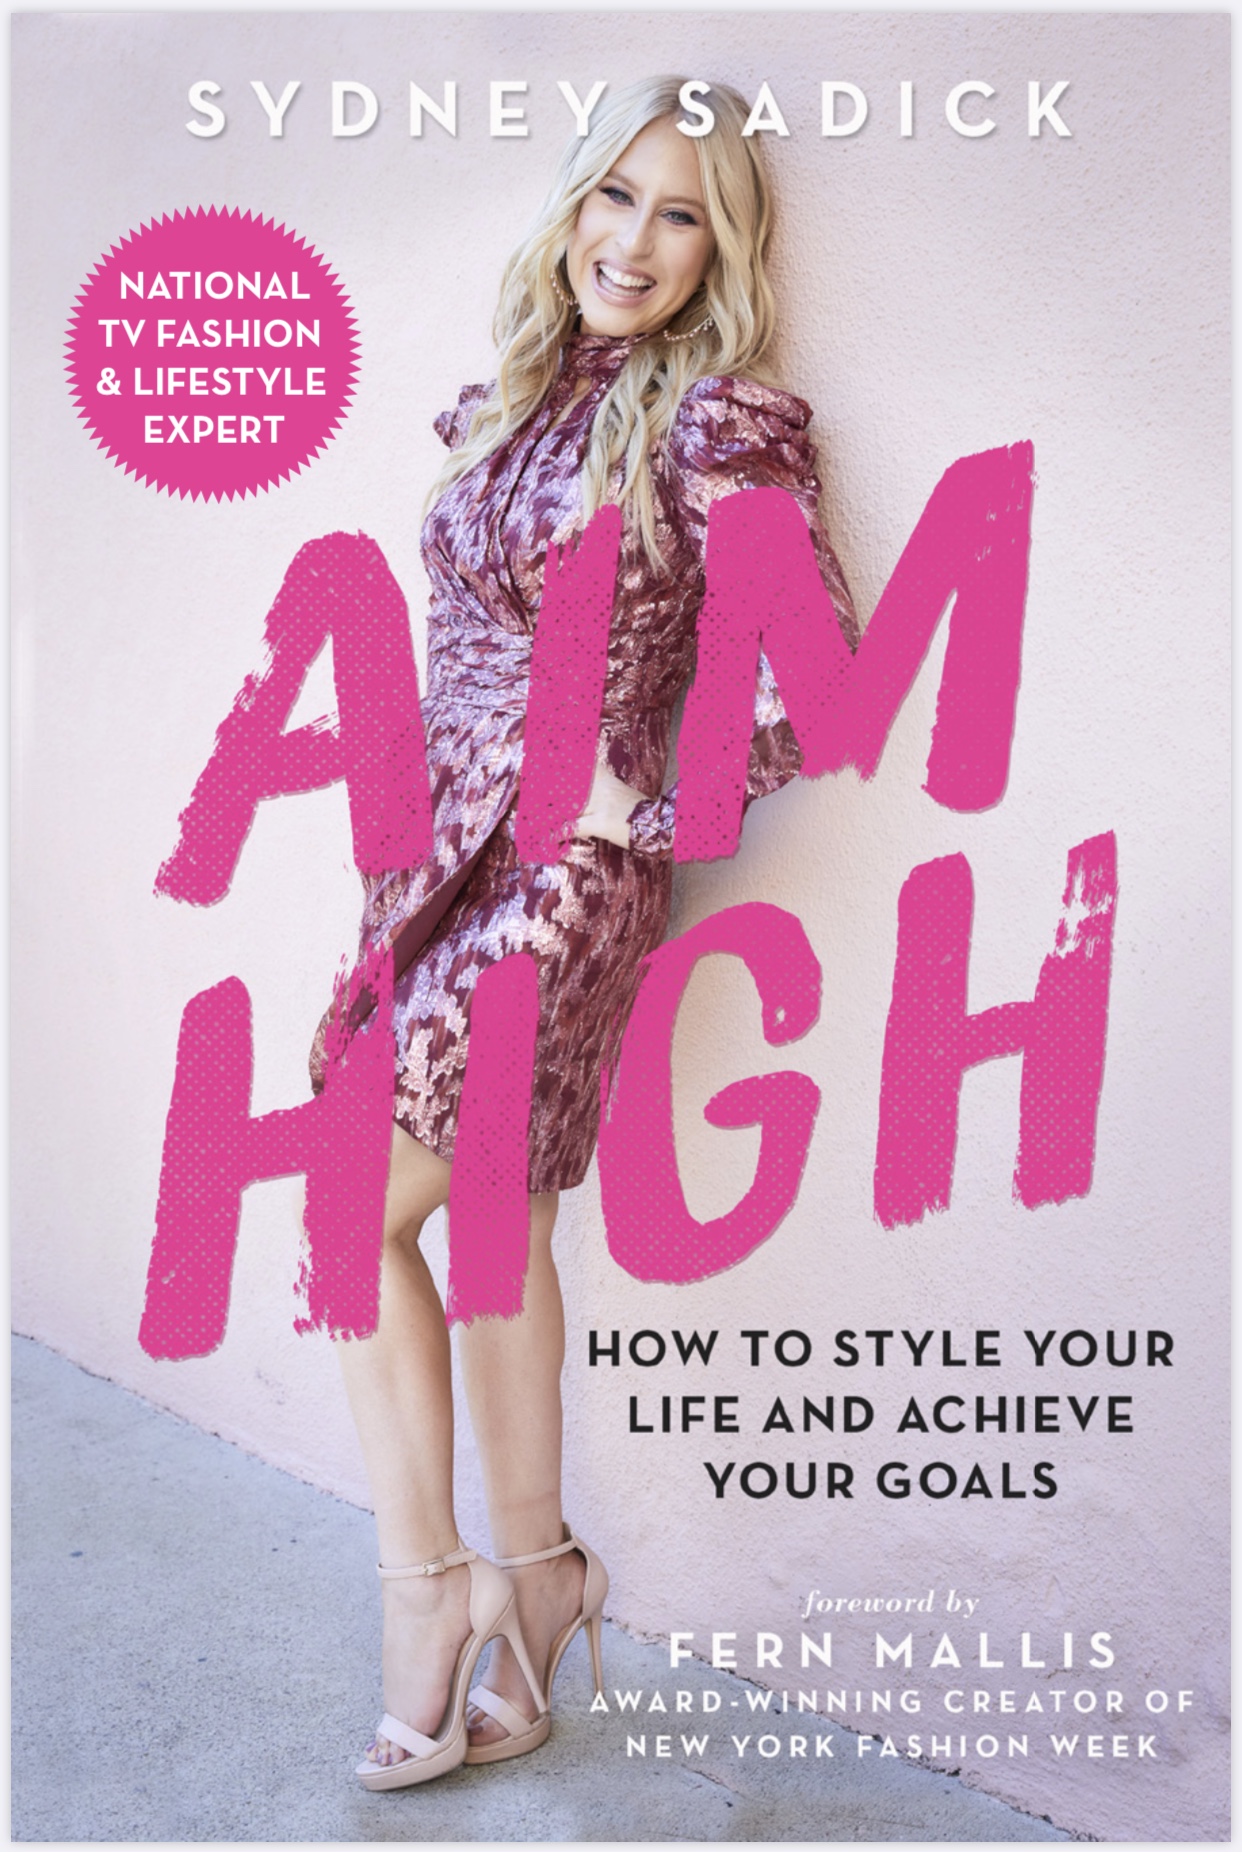 Aim High: How to Style Your Life and Achieve Your Goals by Sydney Sadick